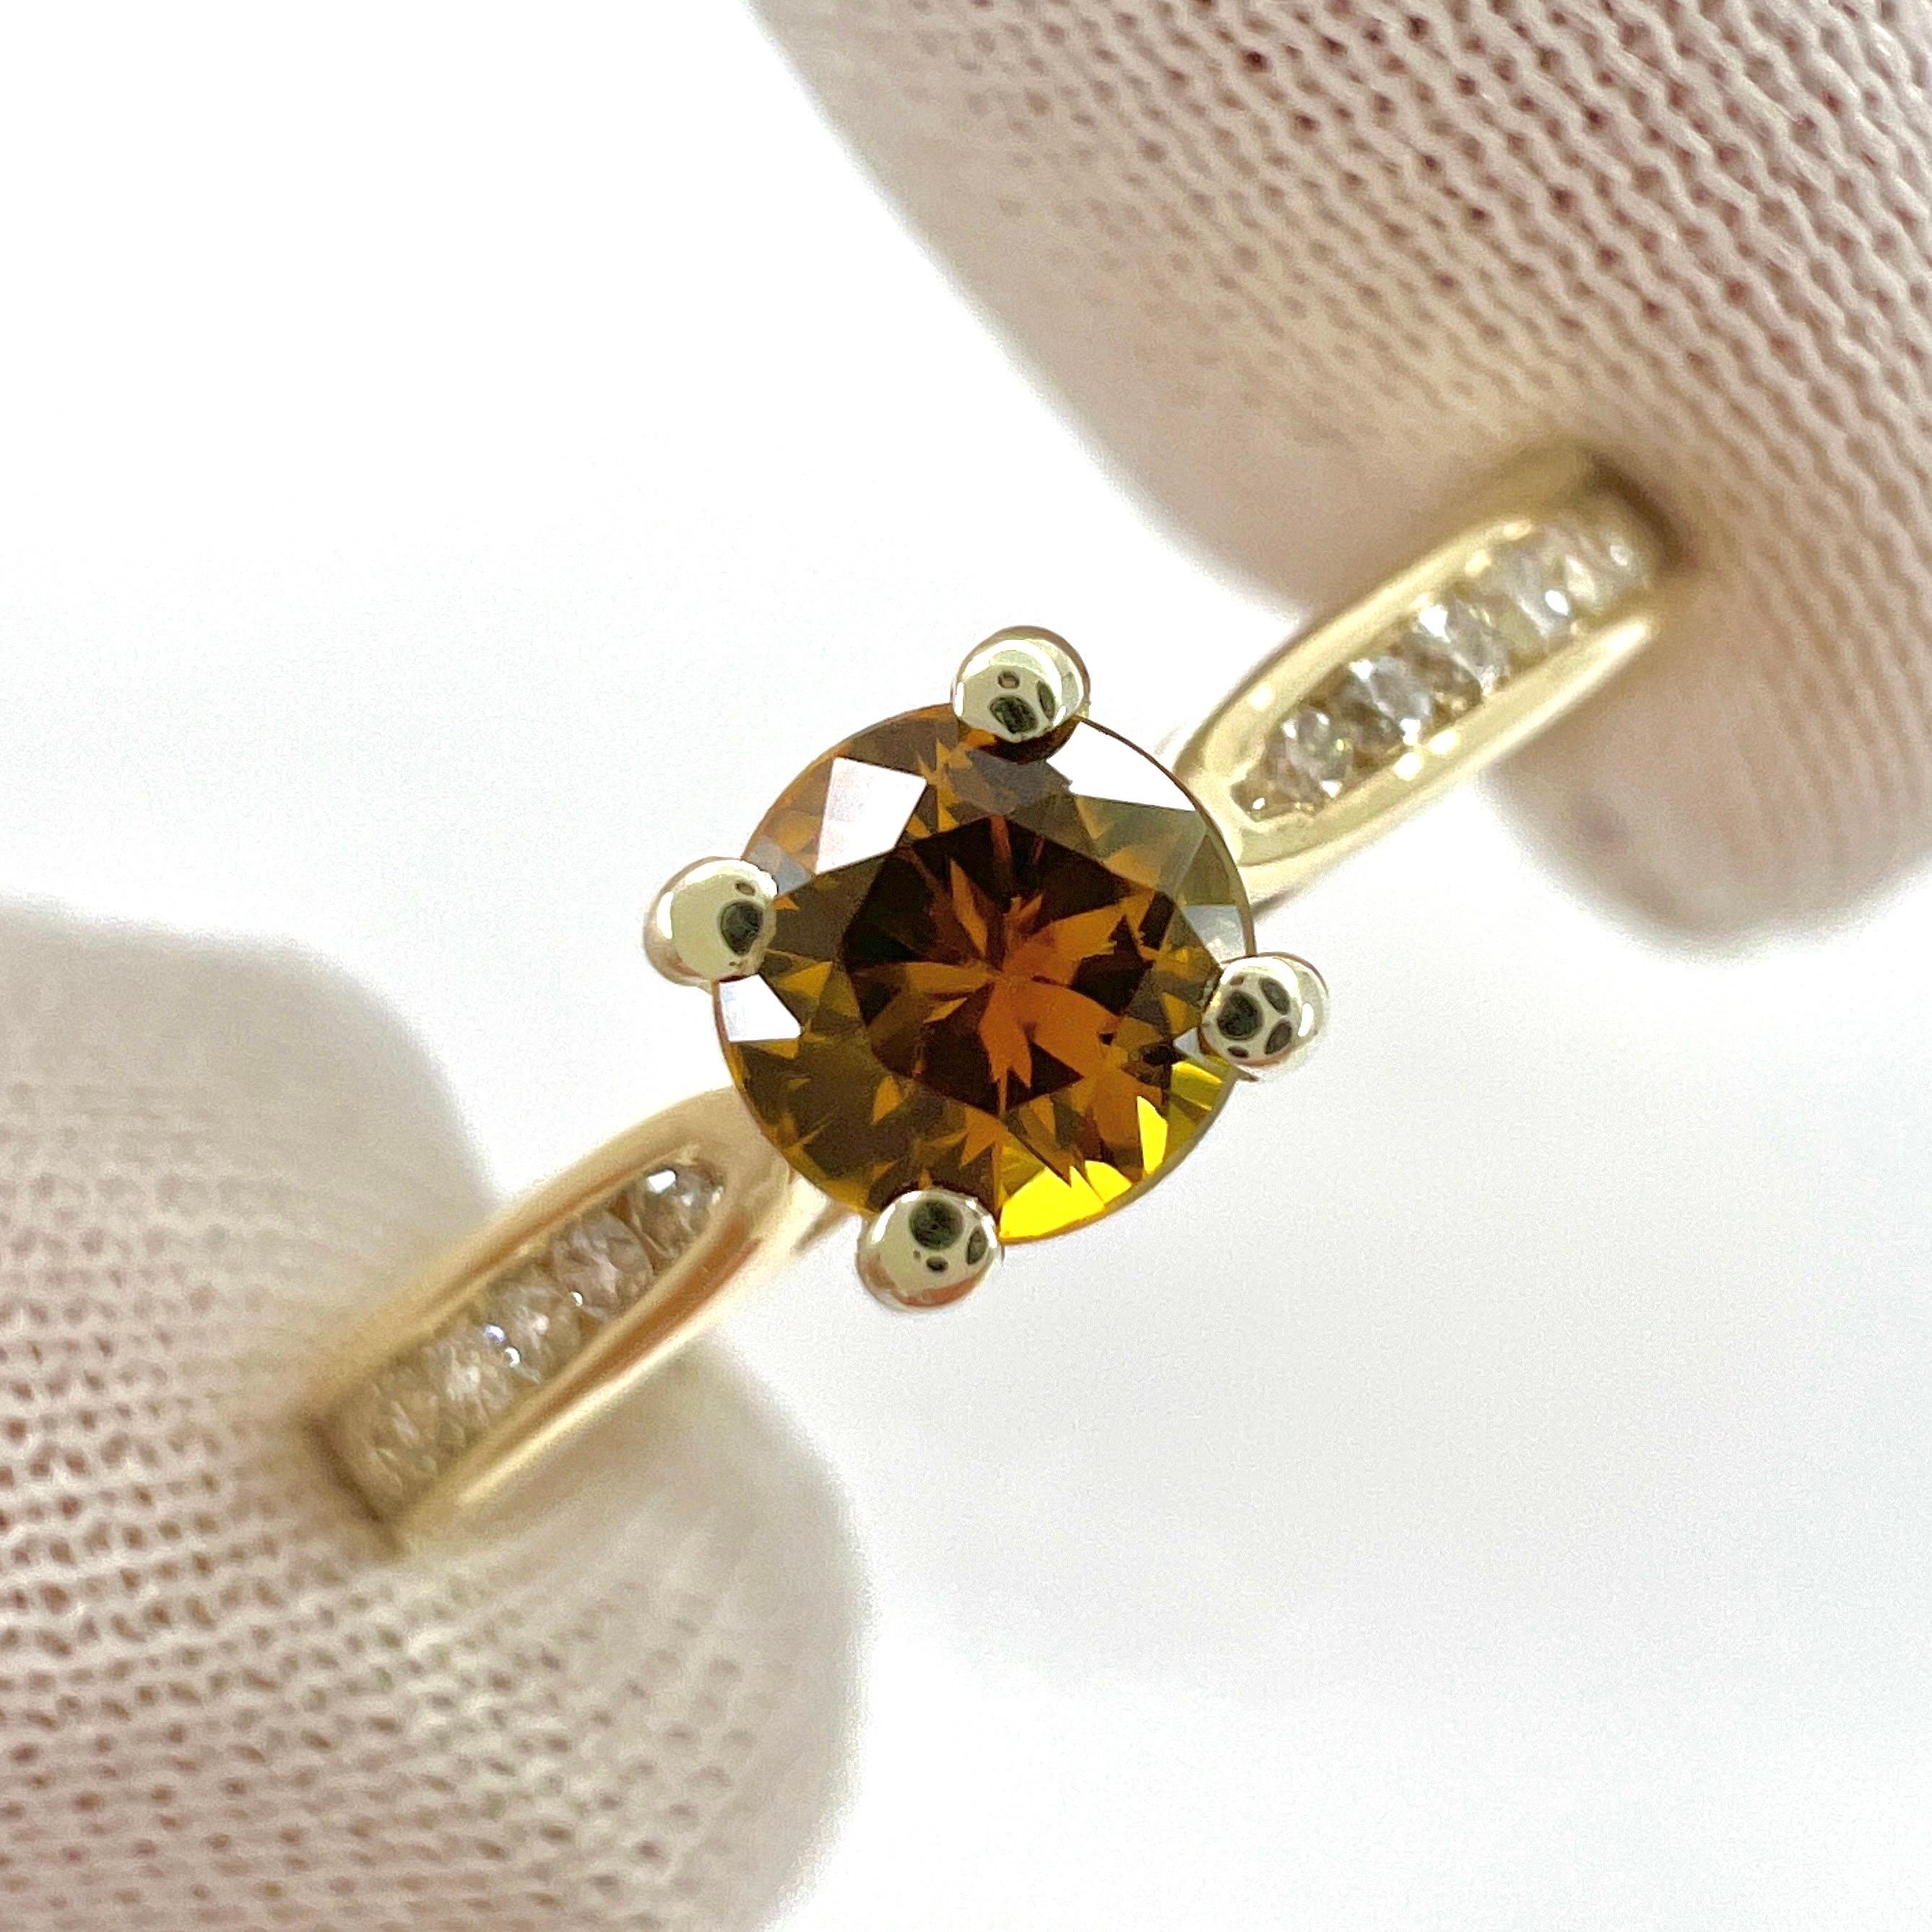 Natural Round Cut Orange Sapphire And Diamond White And Yellow Gold Ring.

0.51 Carat total. This ring features a beautiful orange sapphire stone with a deep orange colour and excellent cut and clarity. The sapphire measures 4mm (0.40 carat).

The